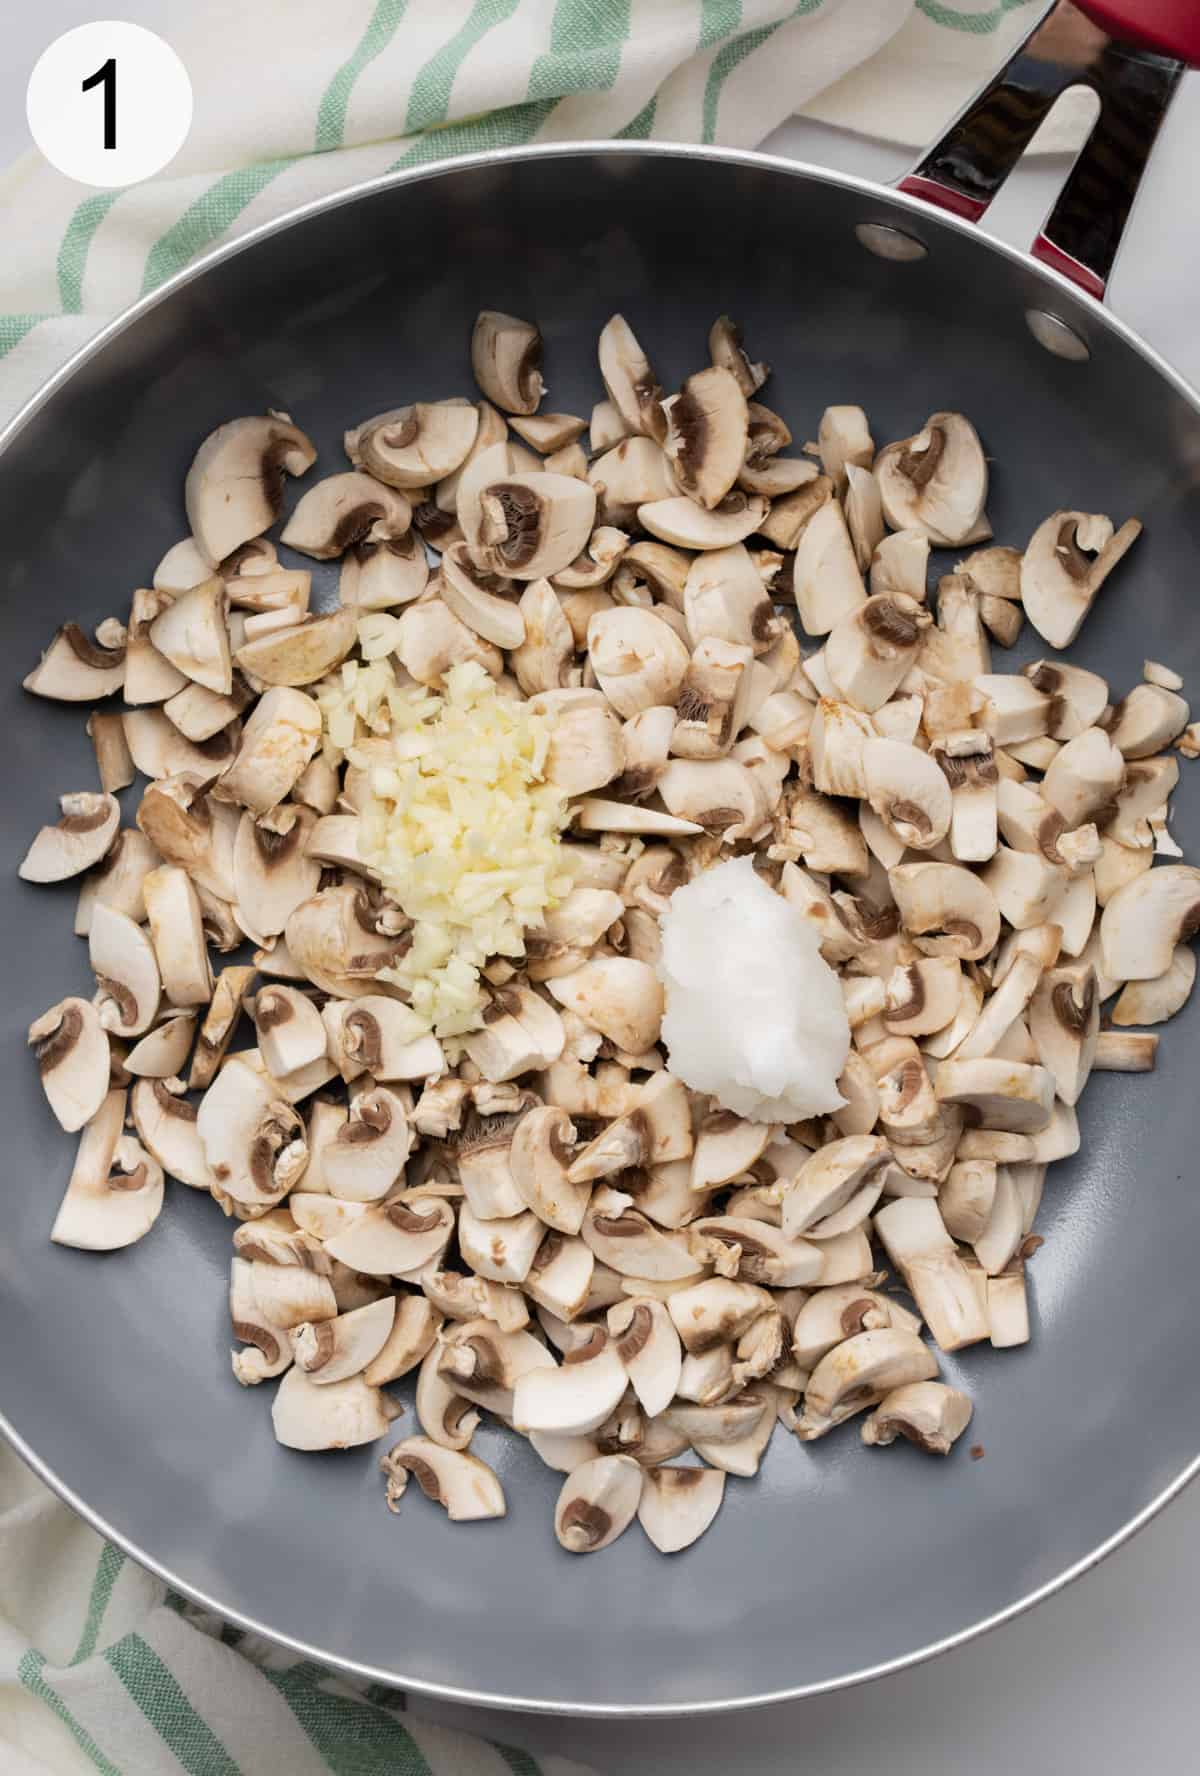 Diced mushrooms, minced garlic, and coconut oil in a large non-stick ceramic frying pan.